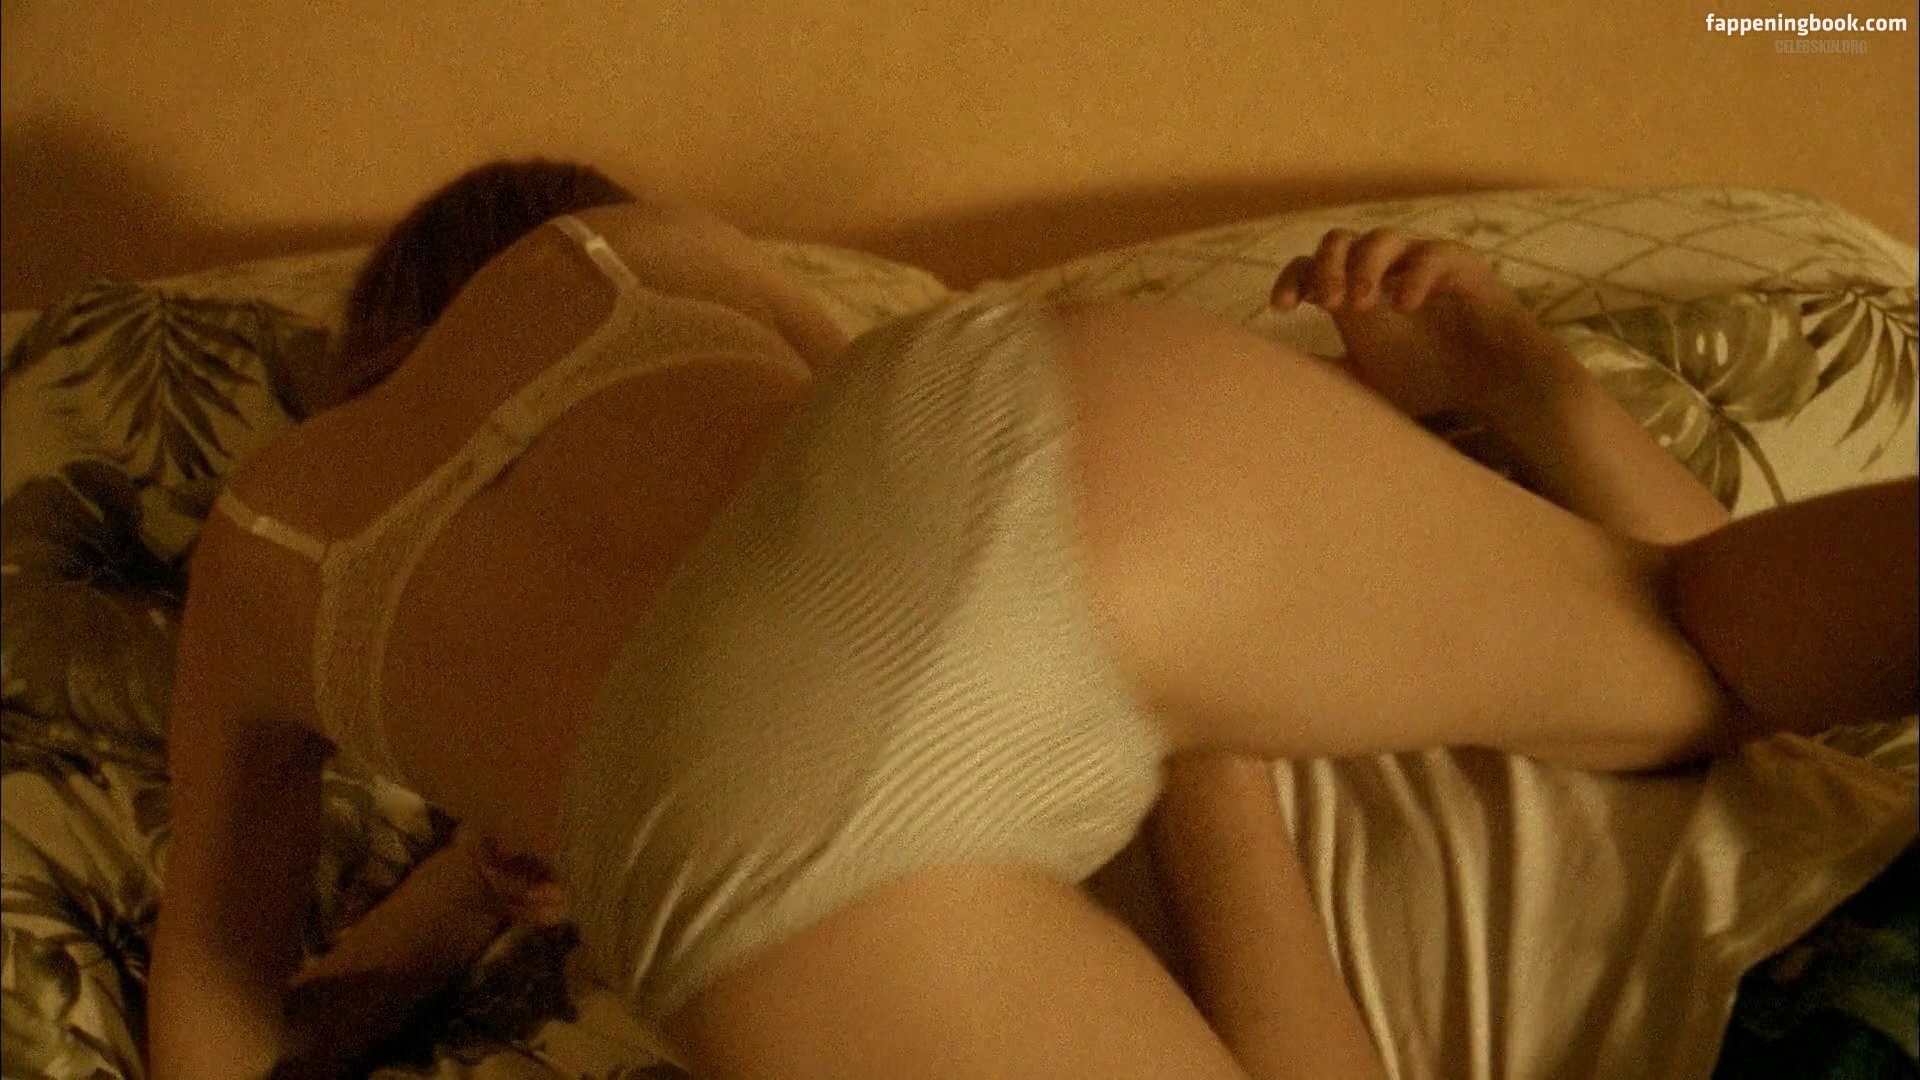 Sexy emily pics browning leaked nudes